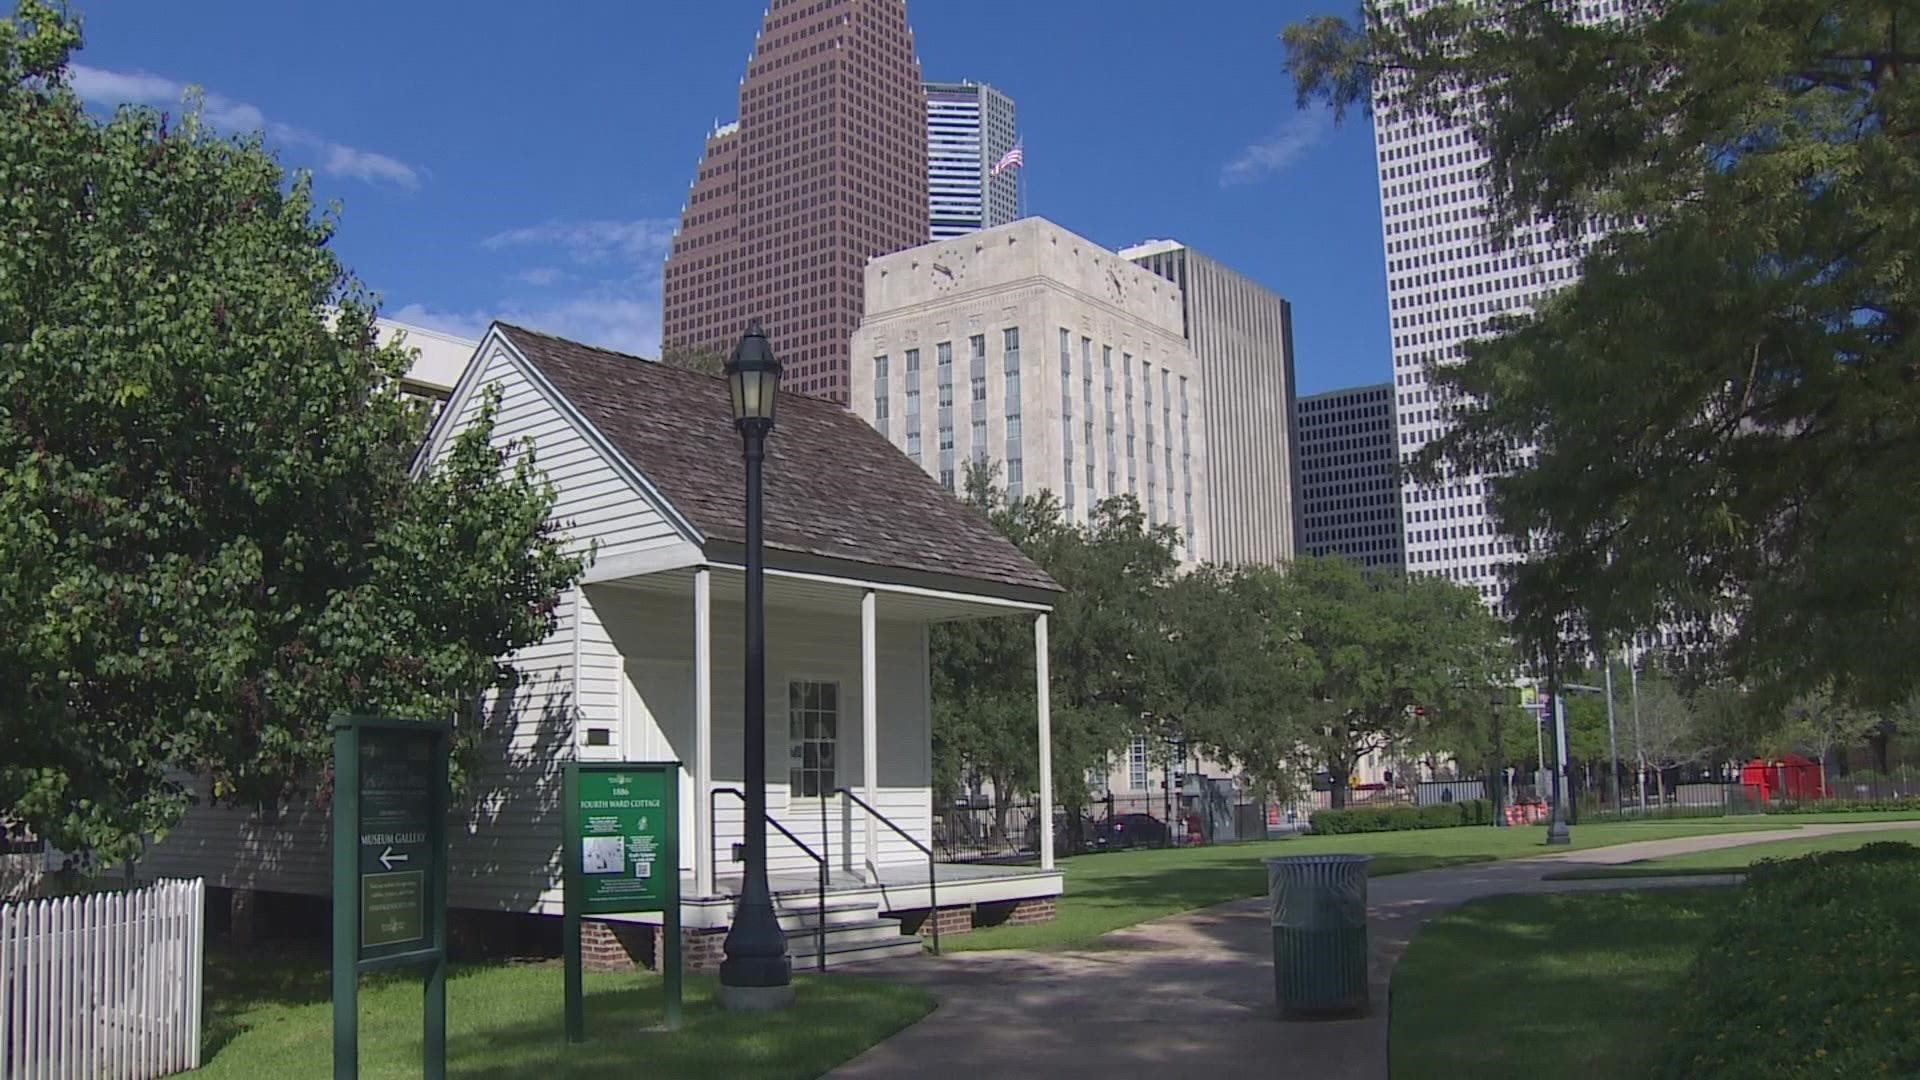 The city's birthday celebration provided attendees a window into Houston's past.